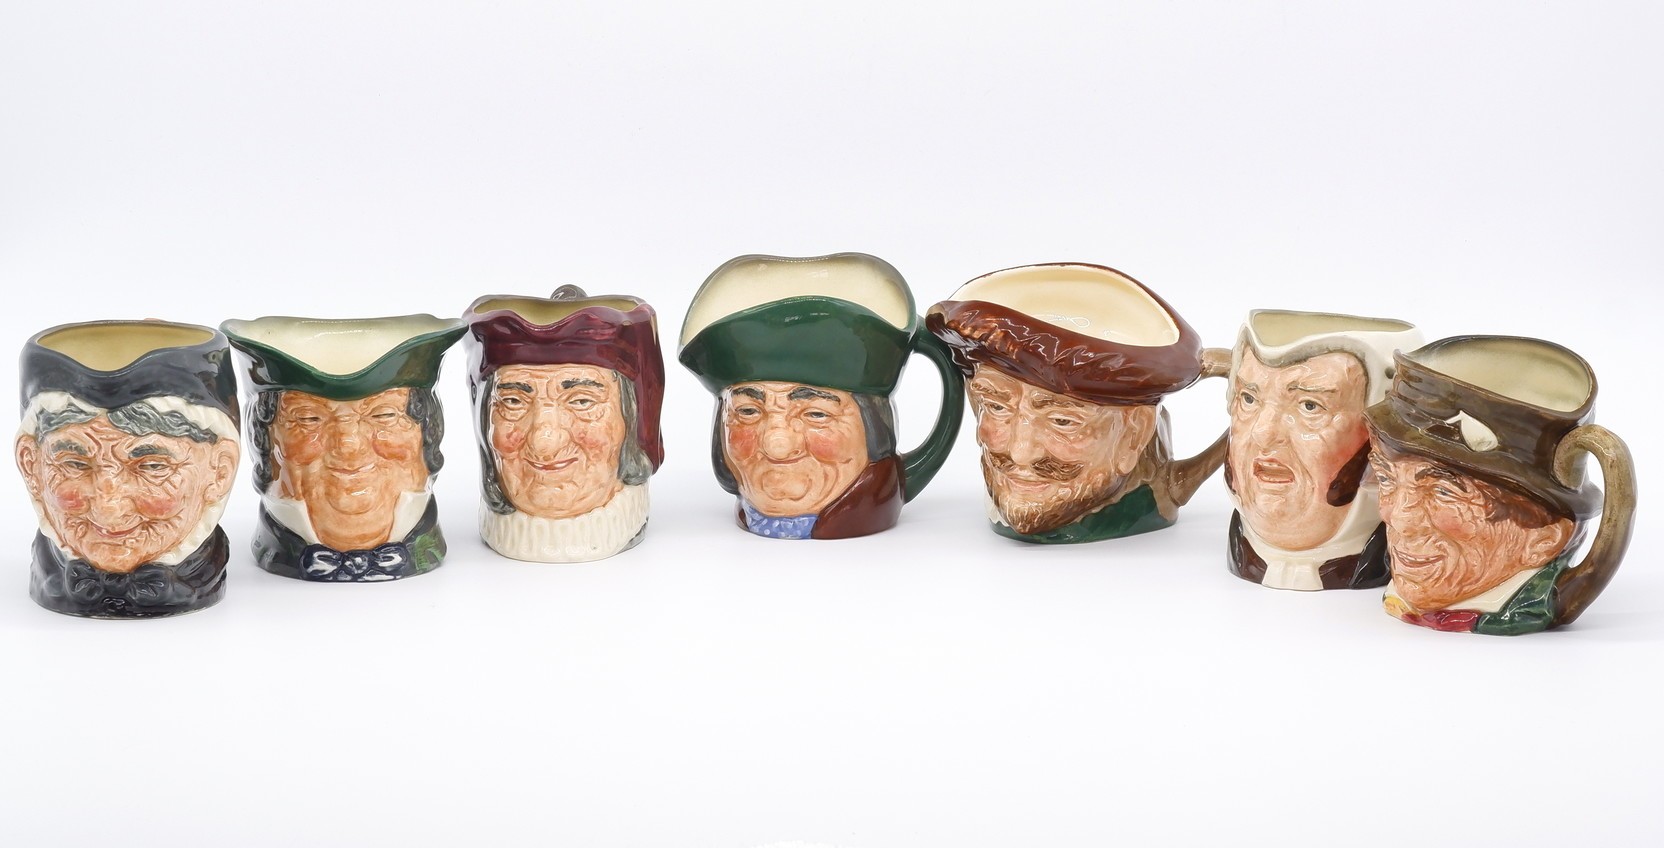 'Collection of Seven Royal Doulton Toby Jugs'